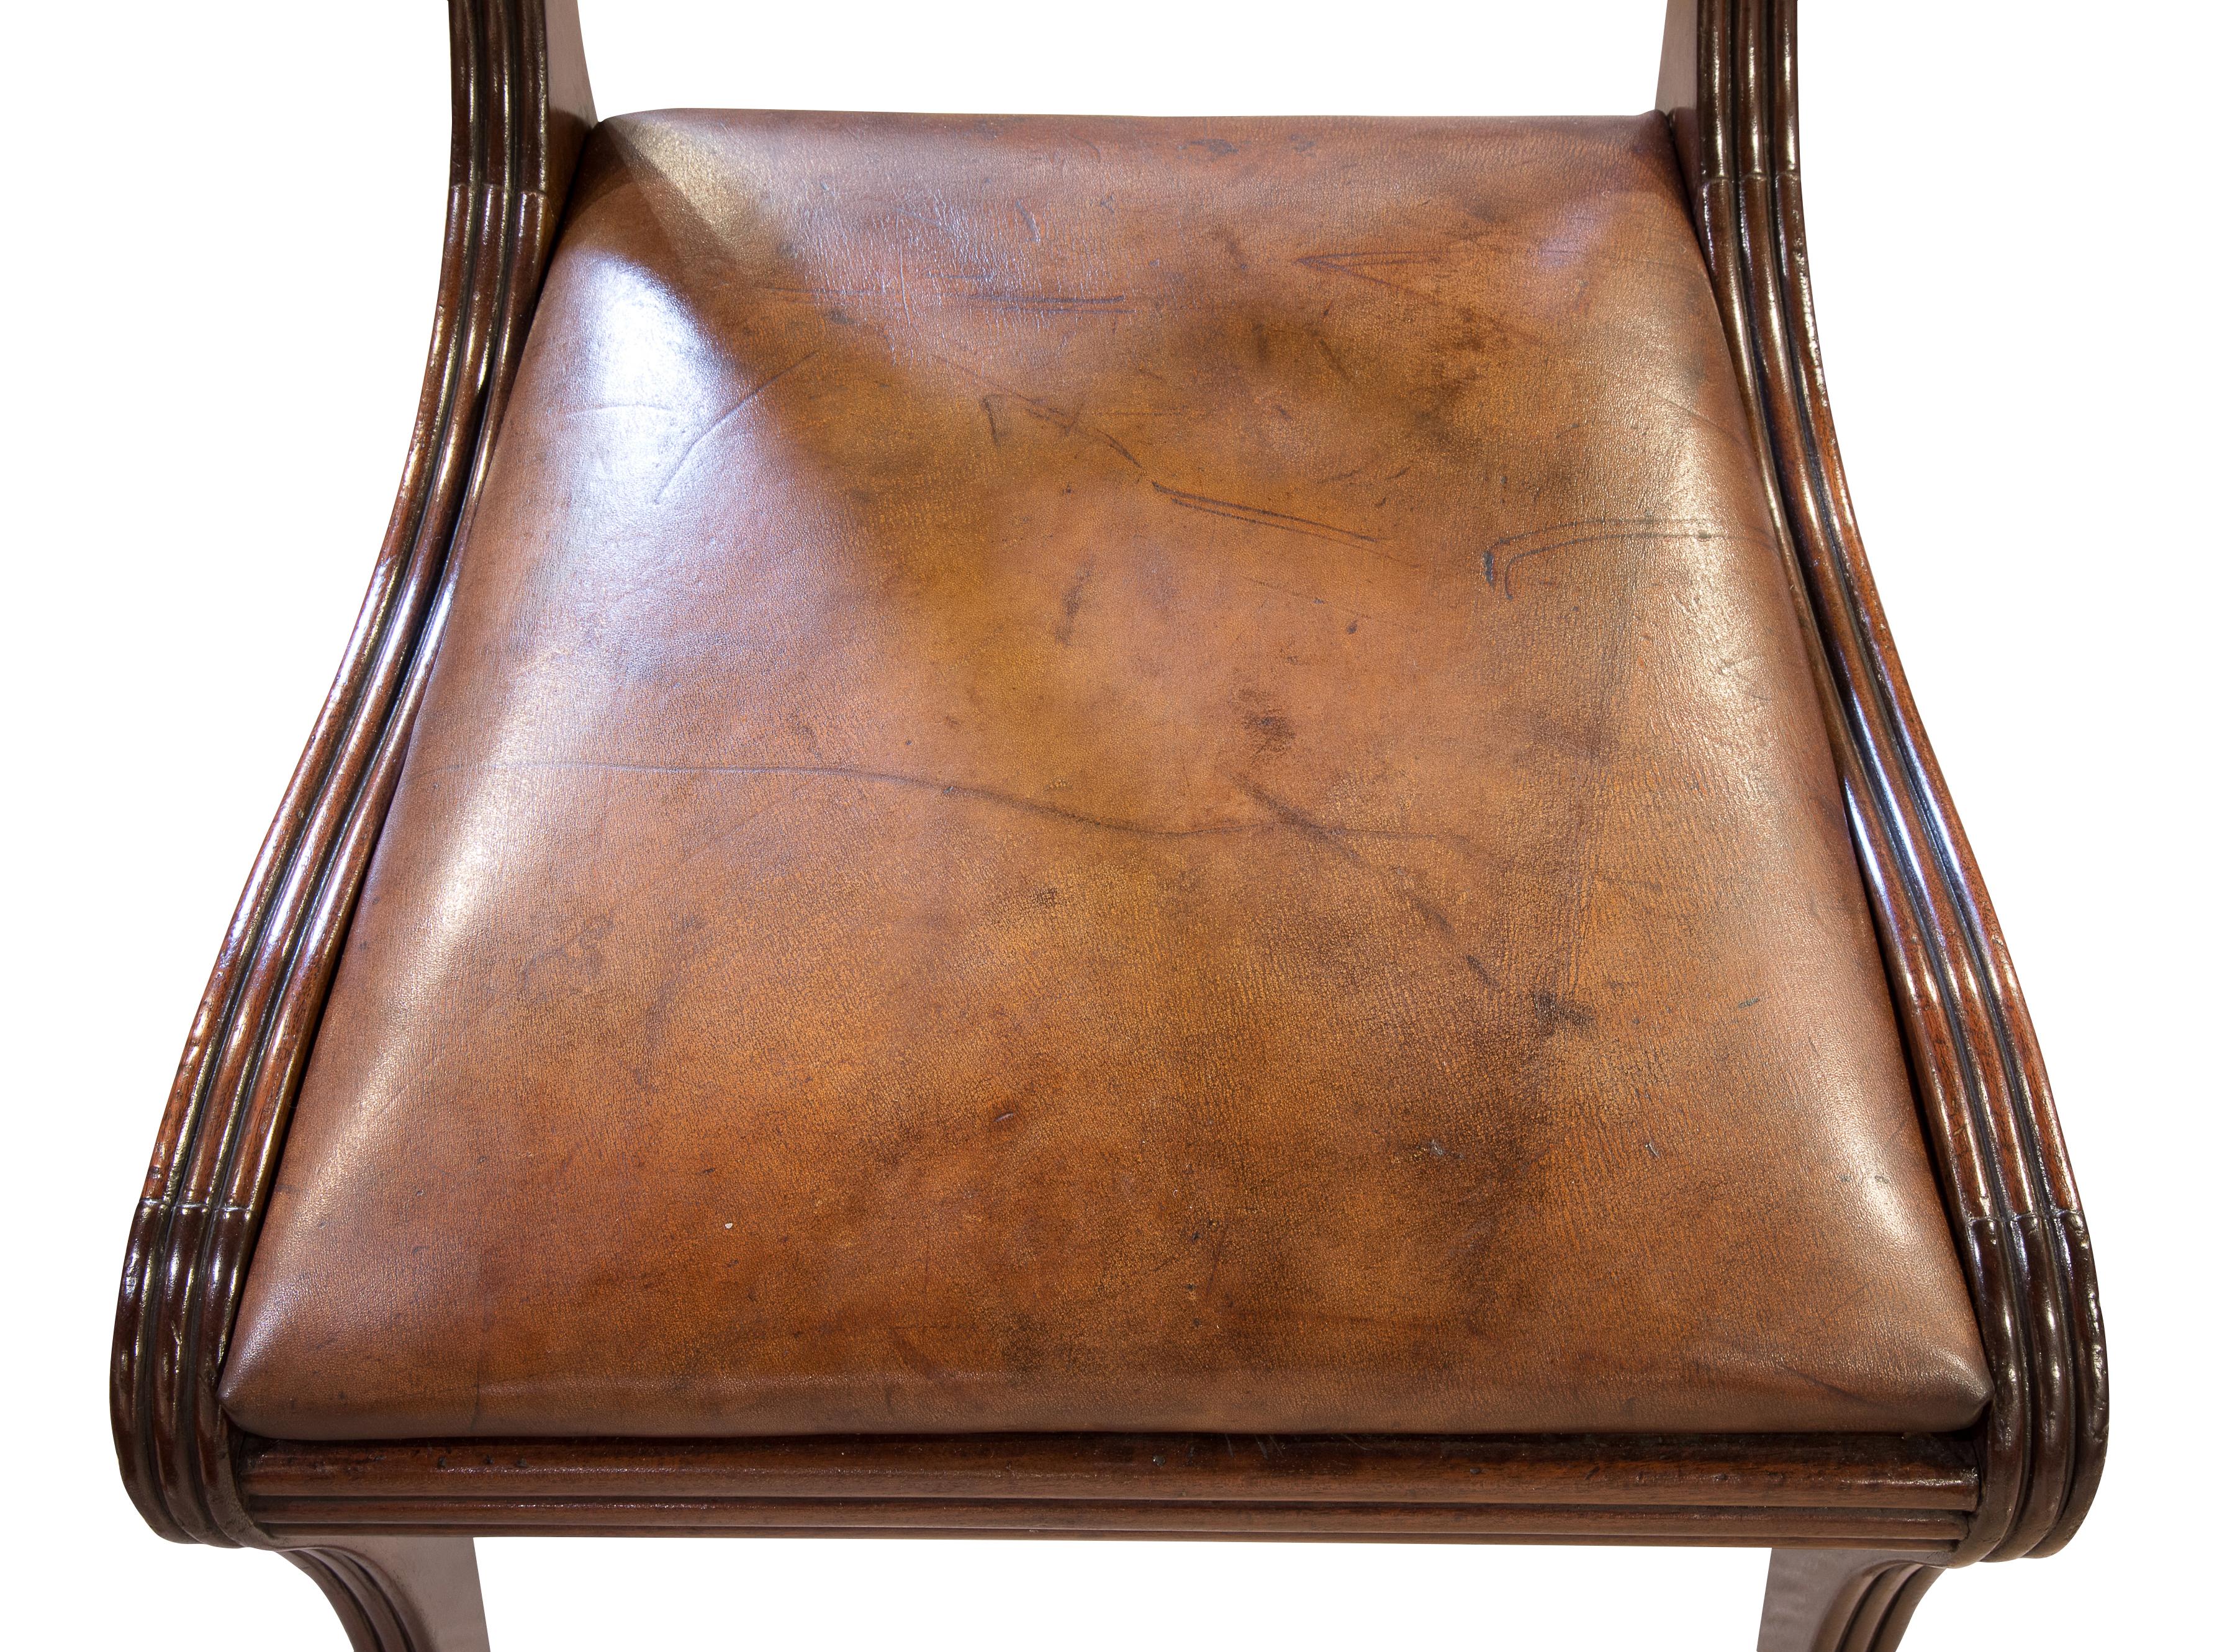 Regency Mahogany Chair with Leather Upholstered Seat, circa 1830 For Sale 2